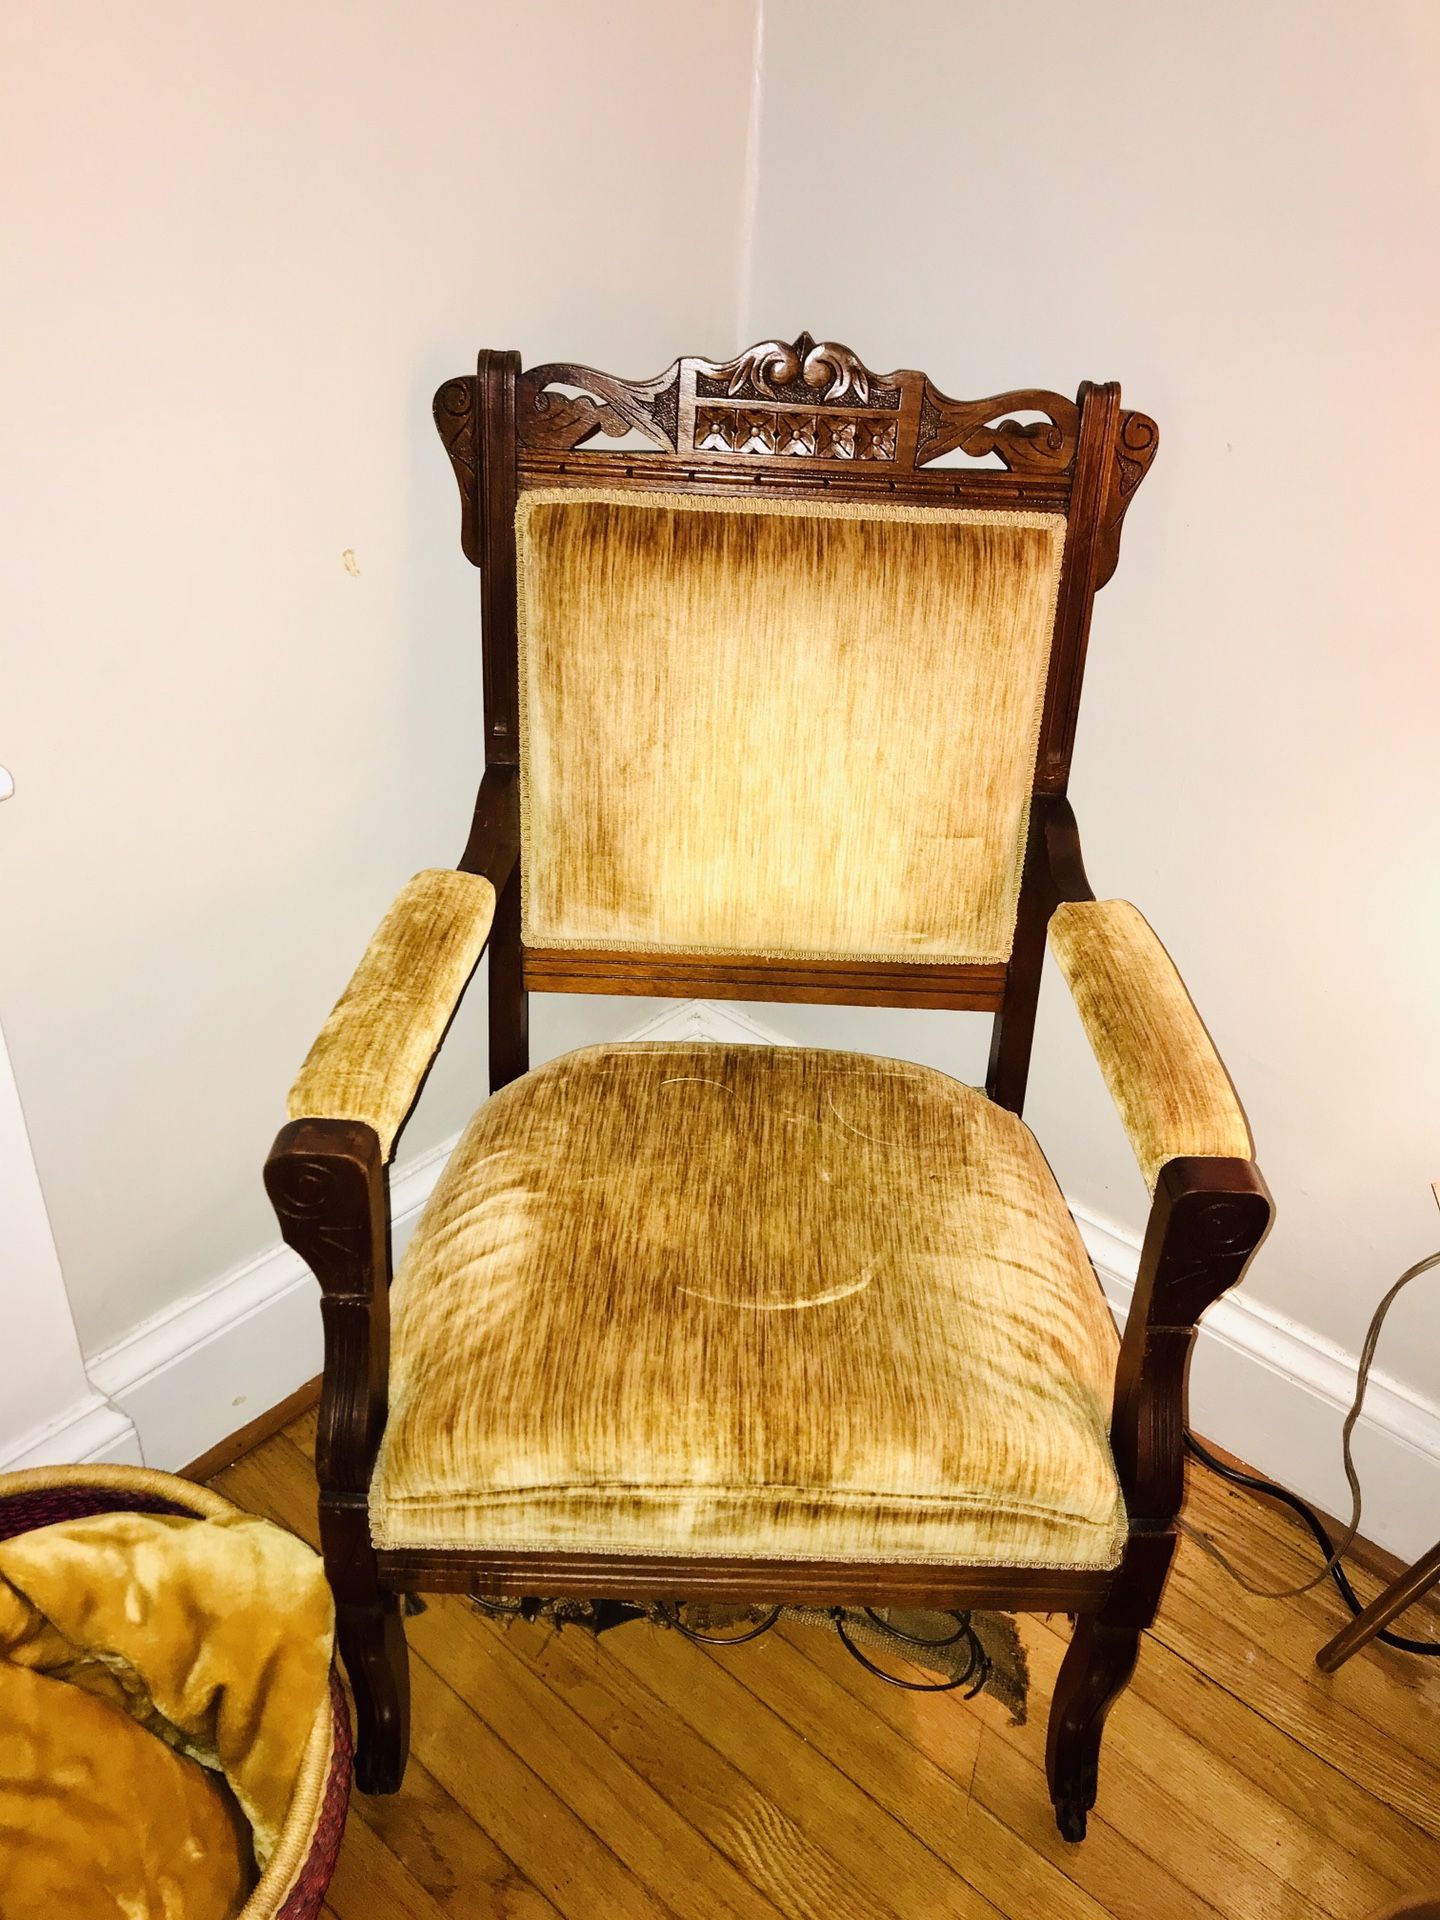 Stunning Mustard Colored Vintage Velvet Accent Chair With Ornate Woodwork